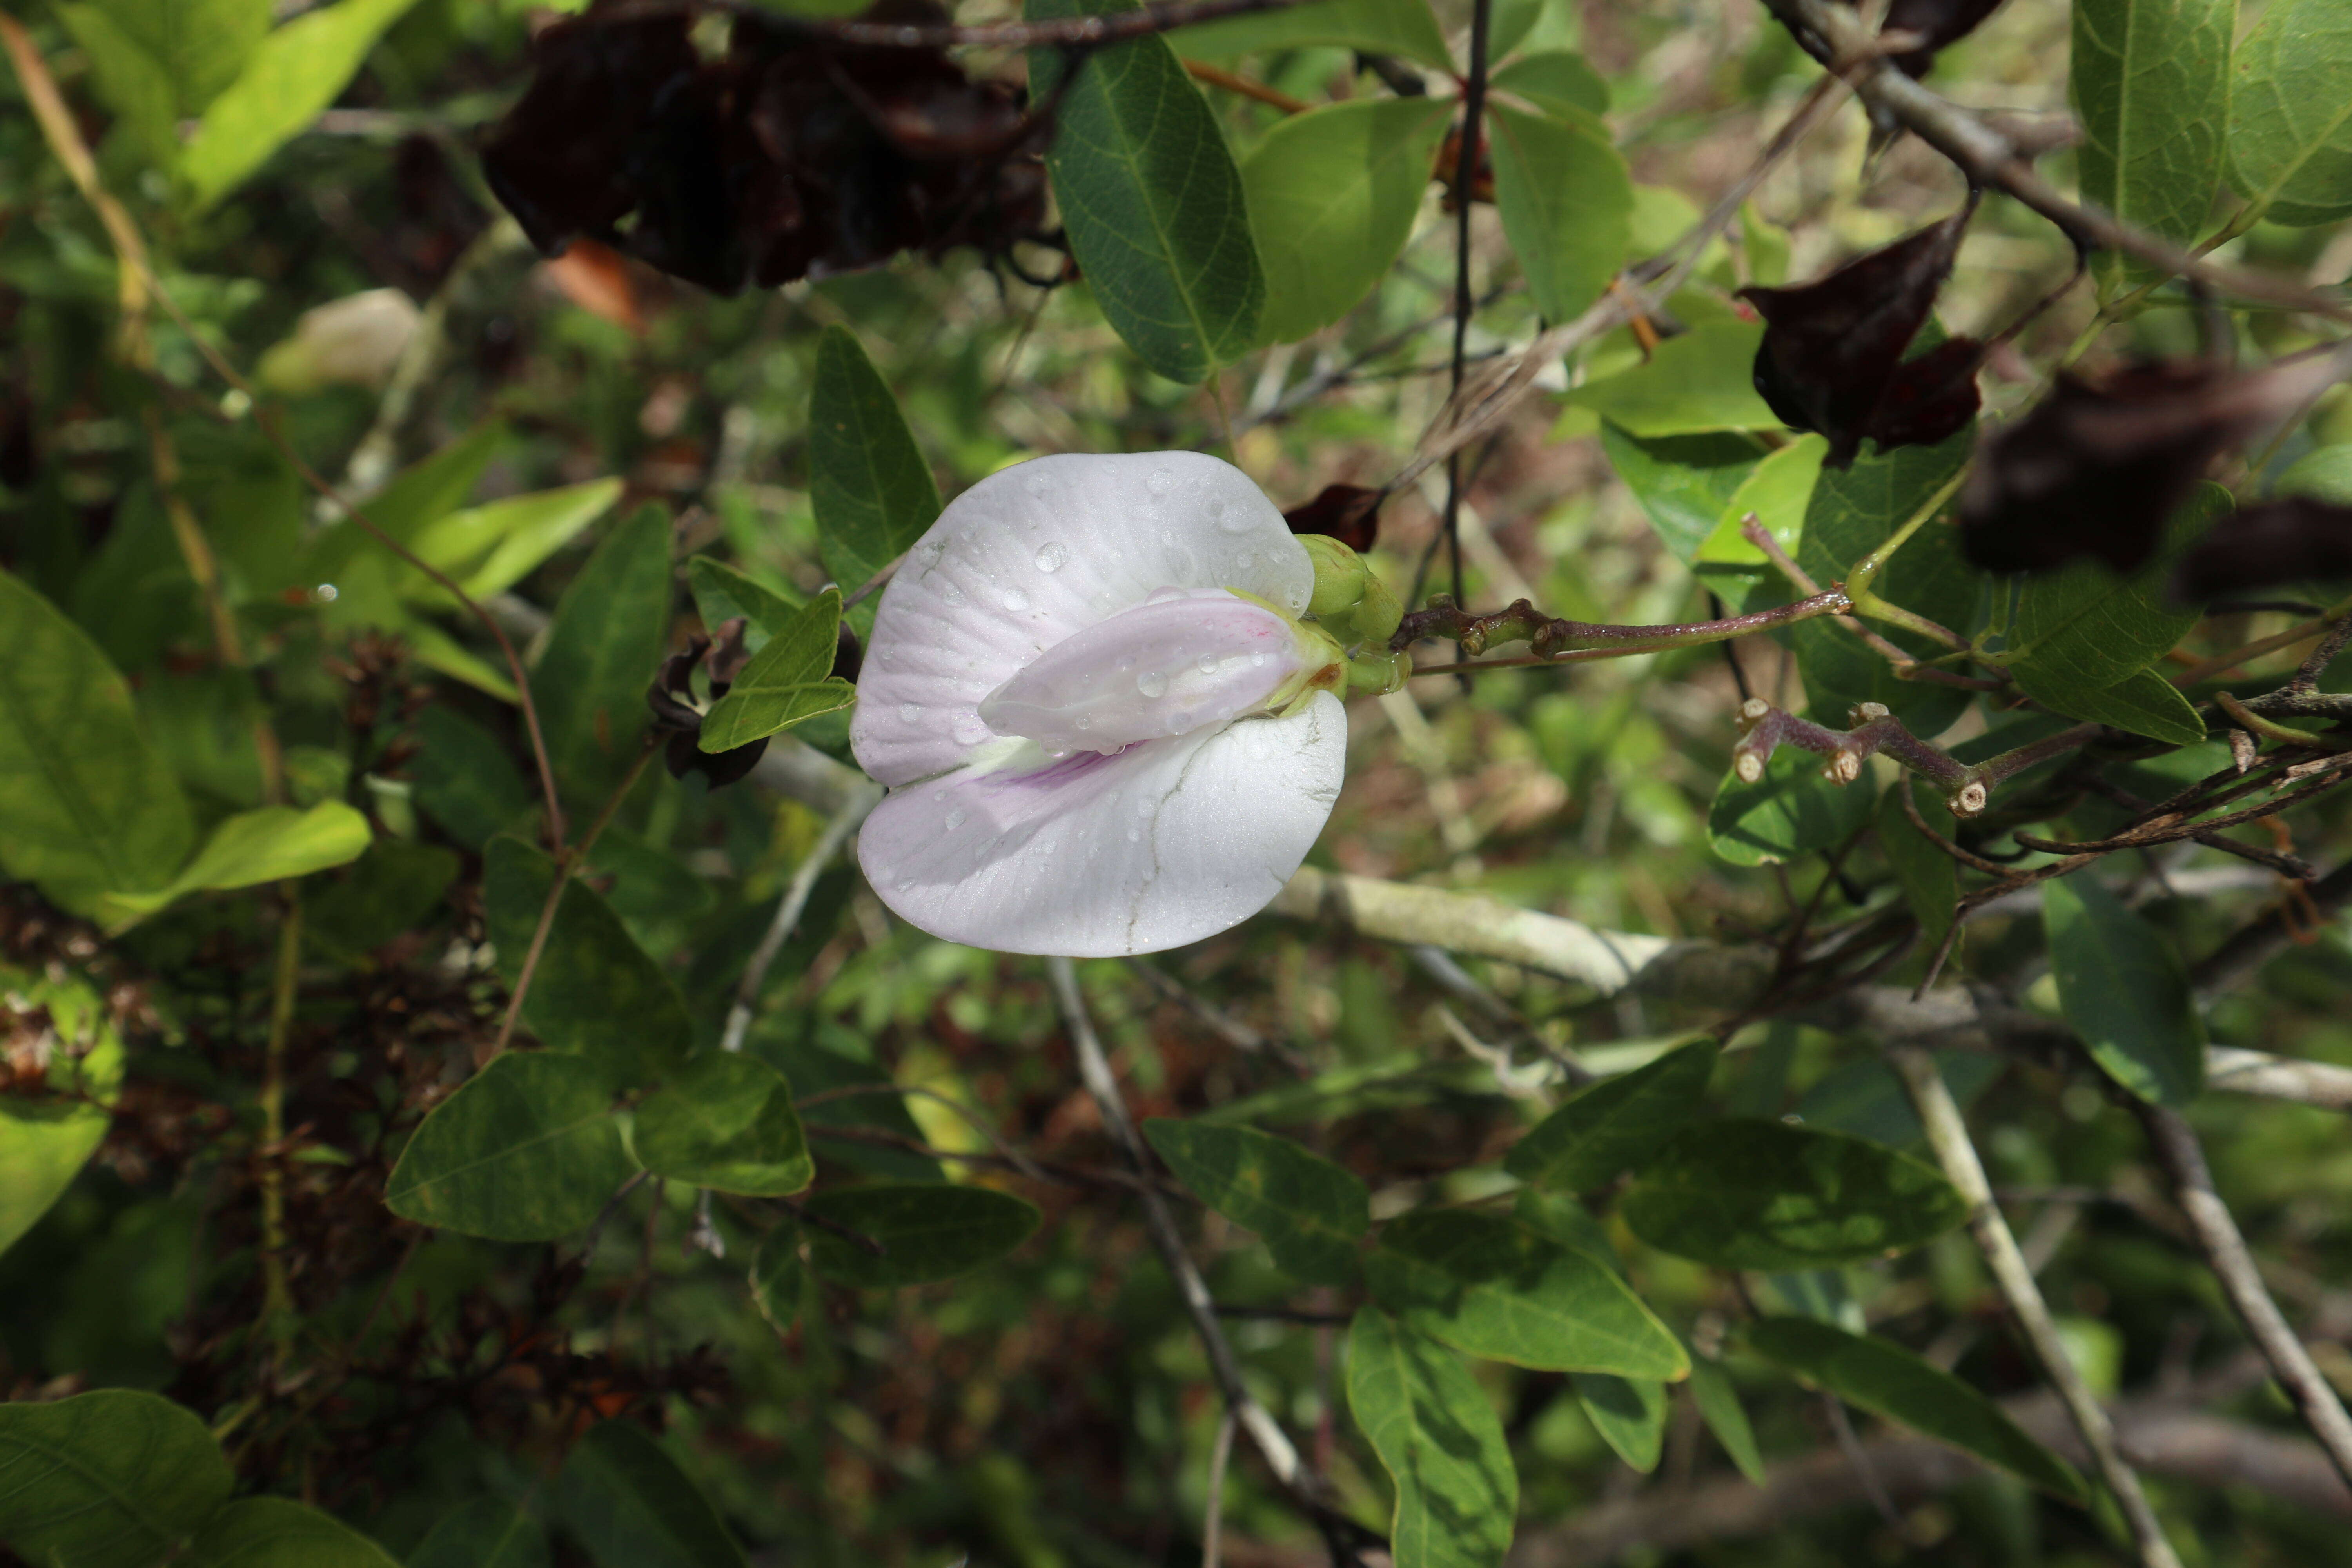 Image of pineland butterfly pea